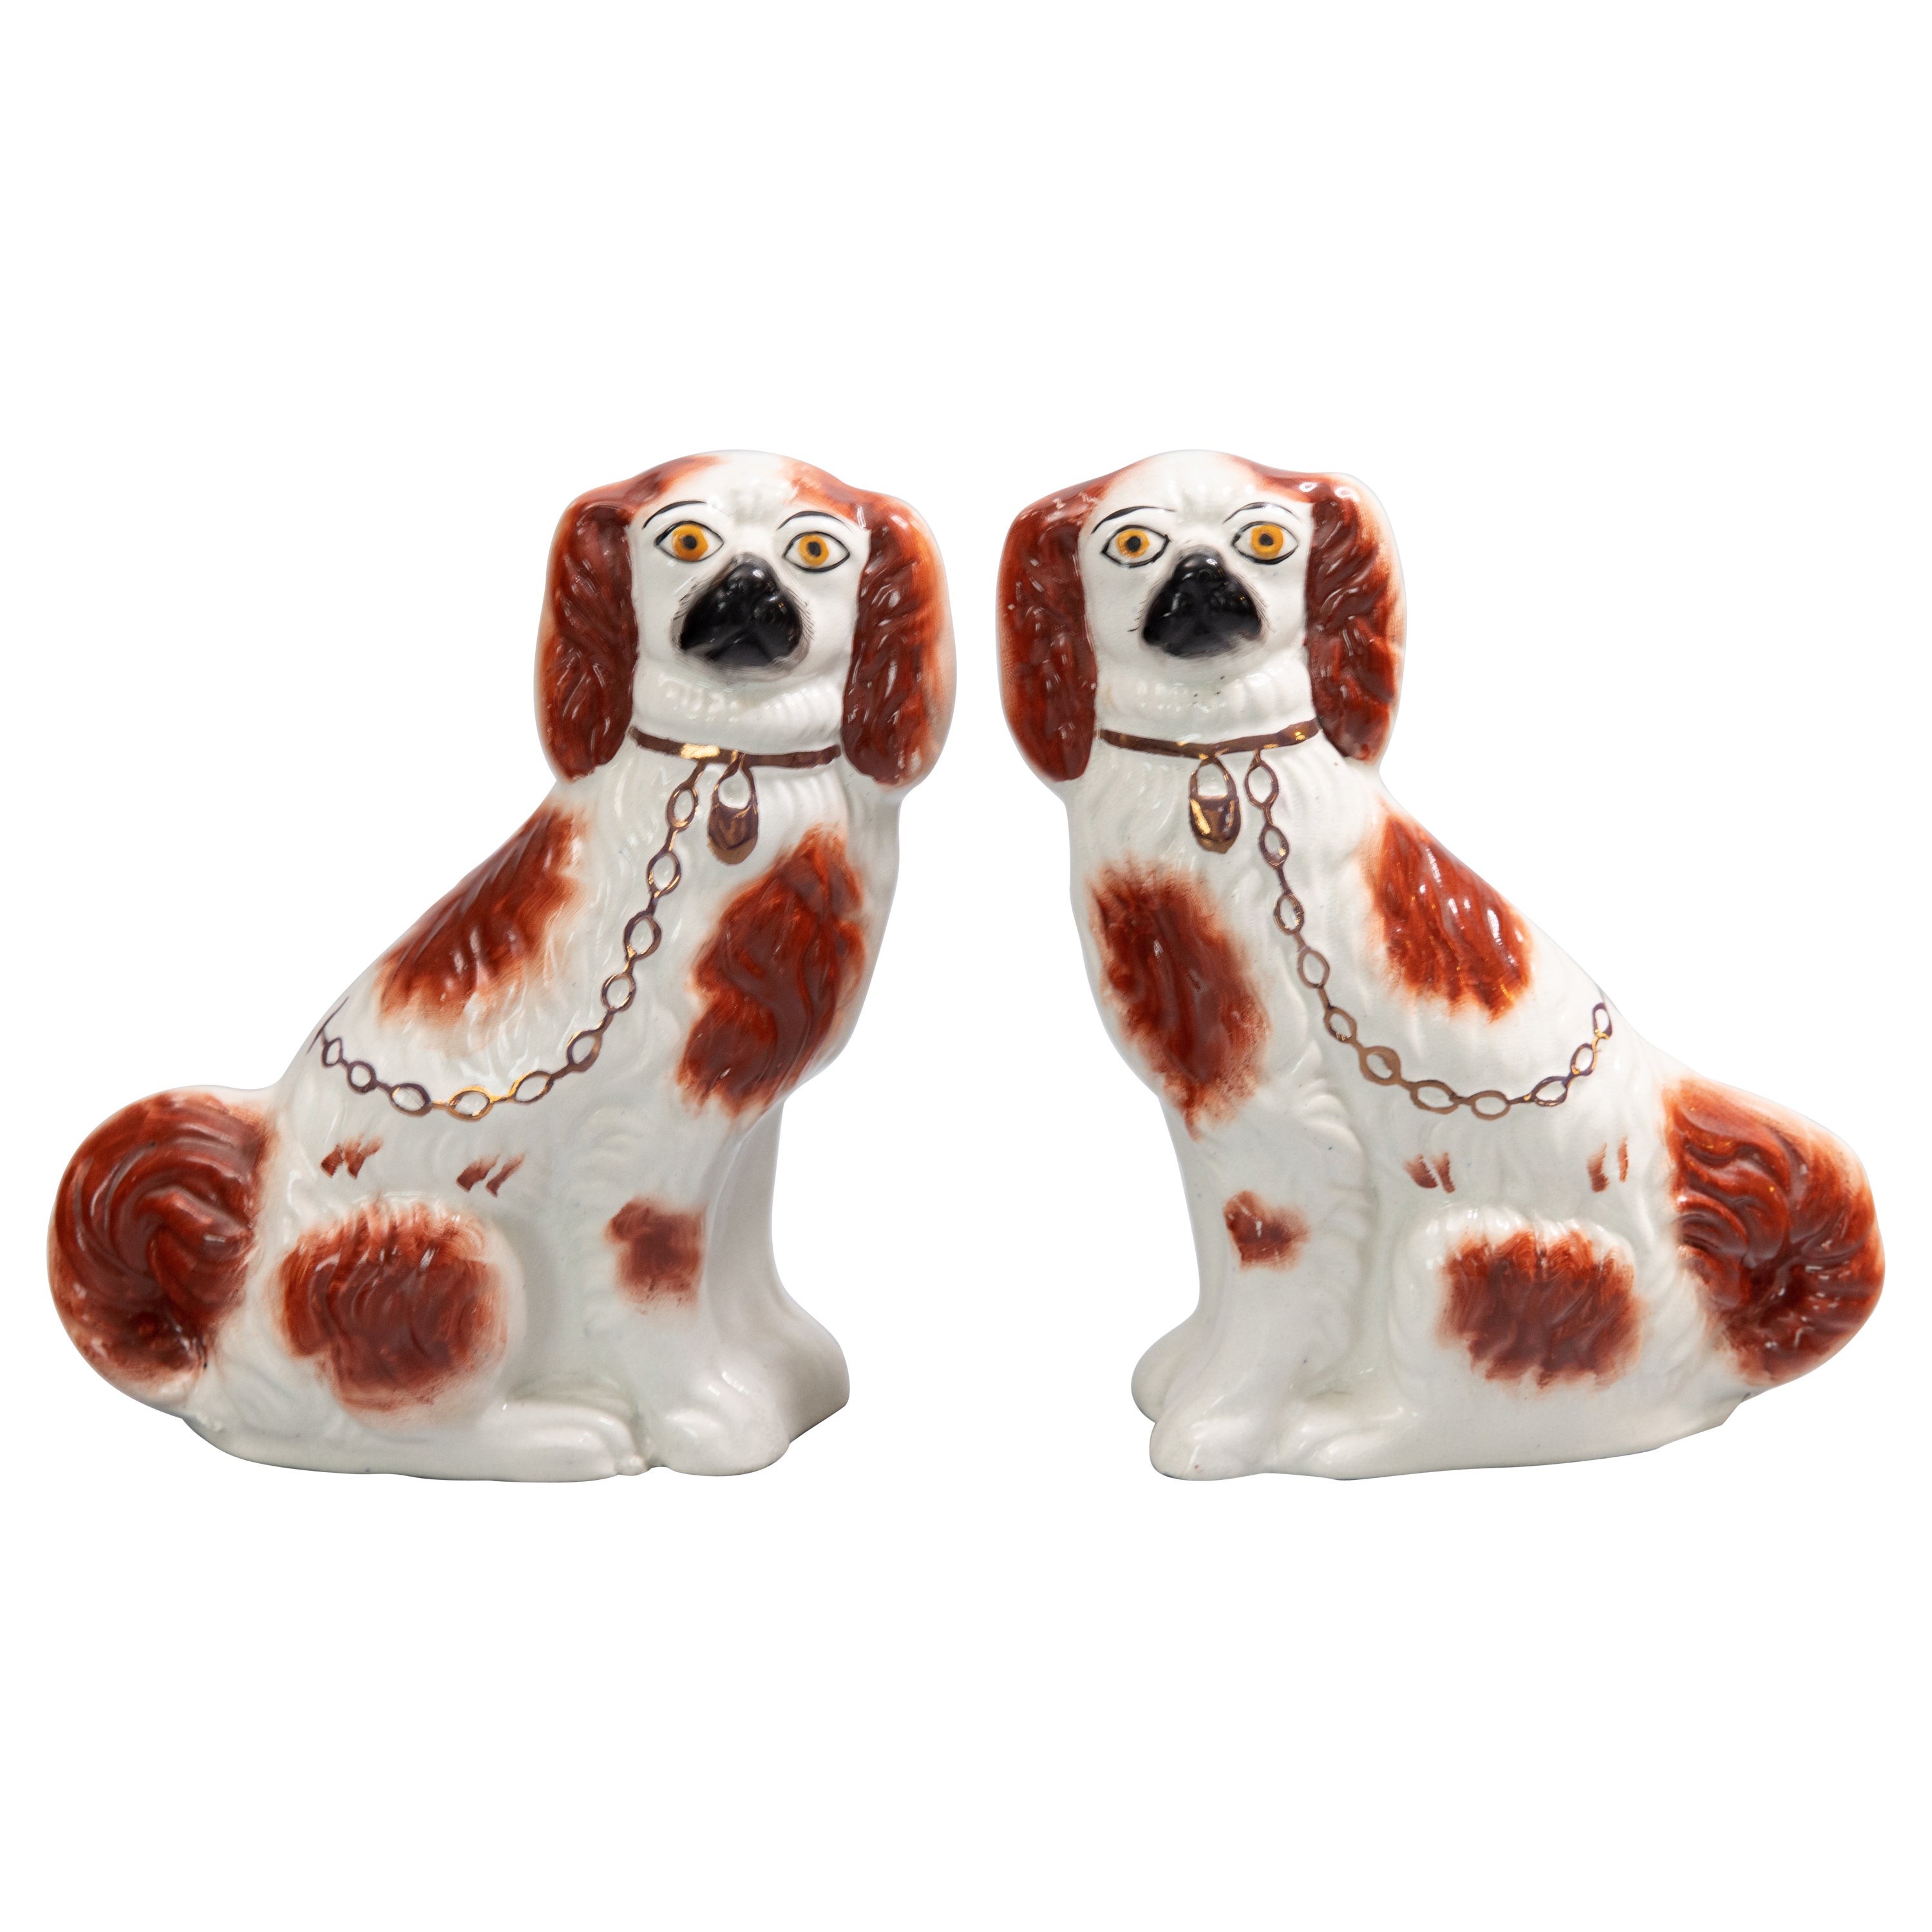 Pair of 19th Century English Staffordshire Russet Spaniel Dogs Figurines